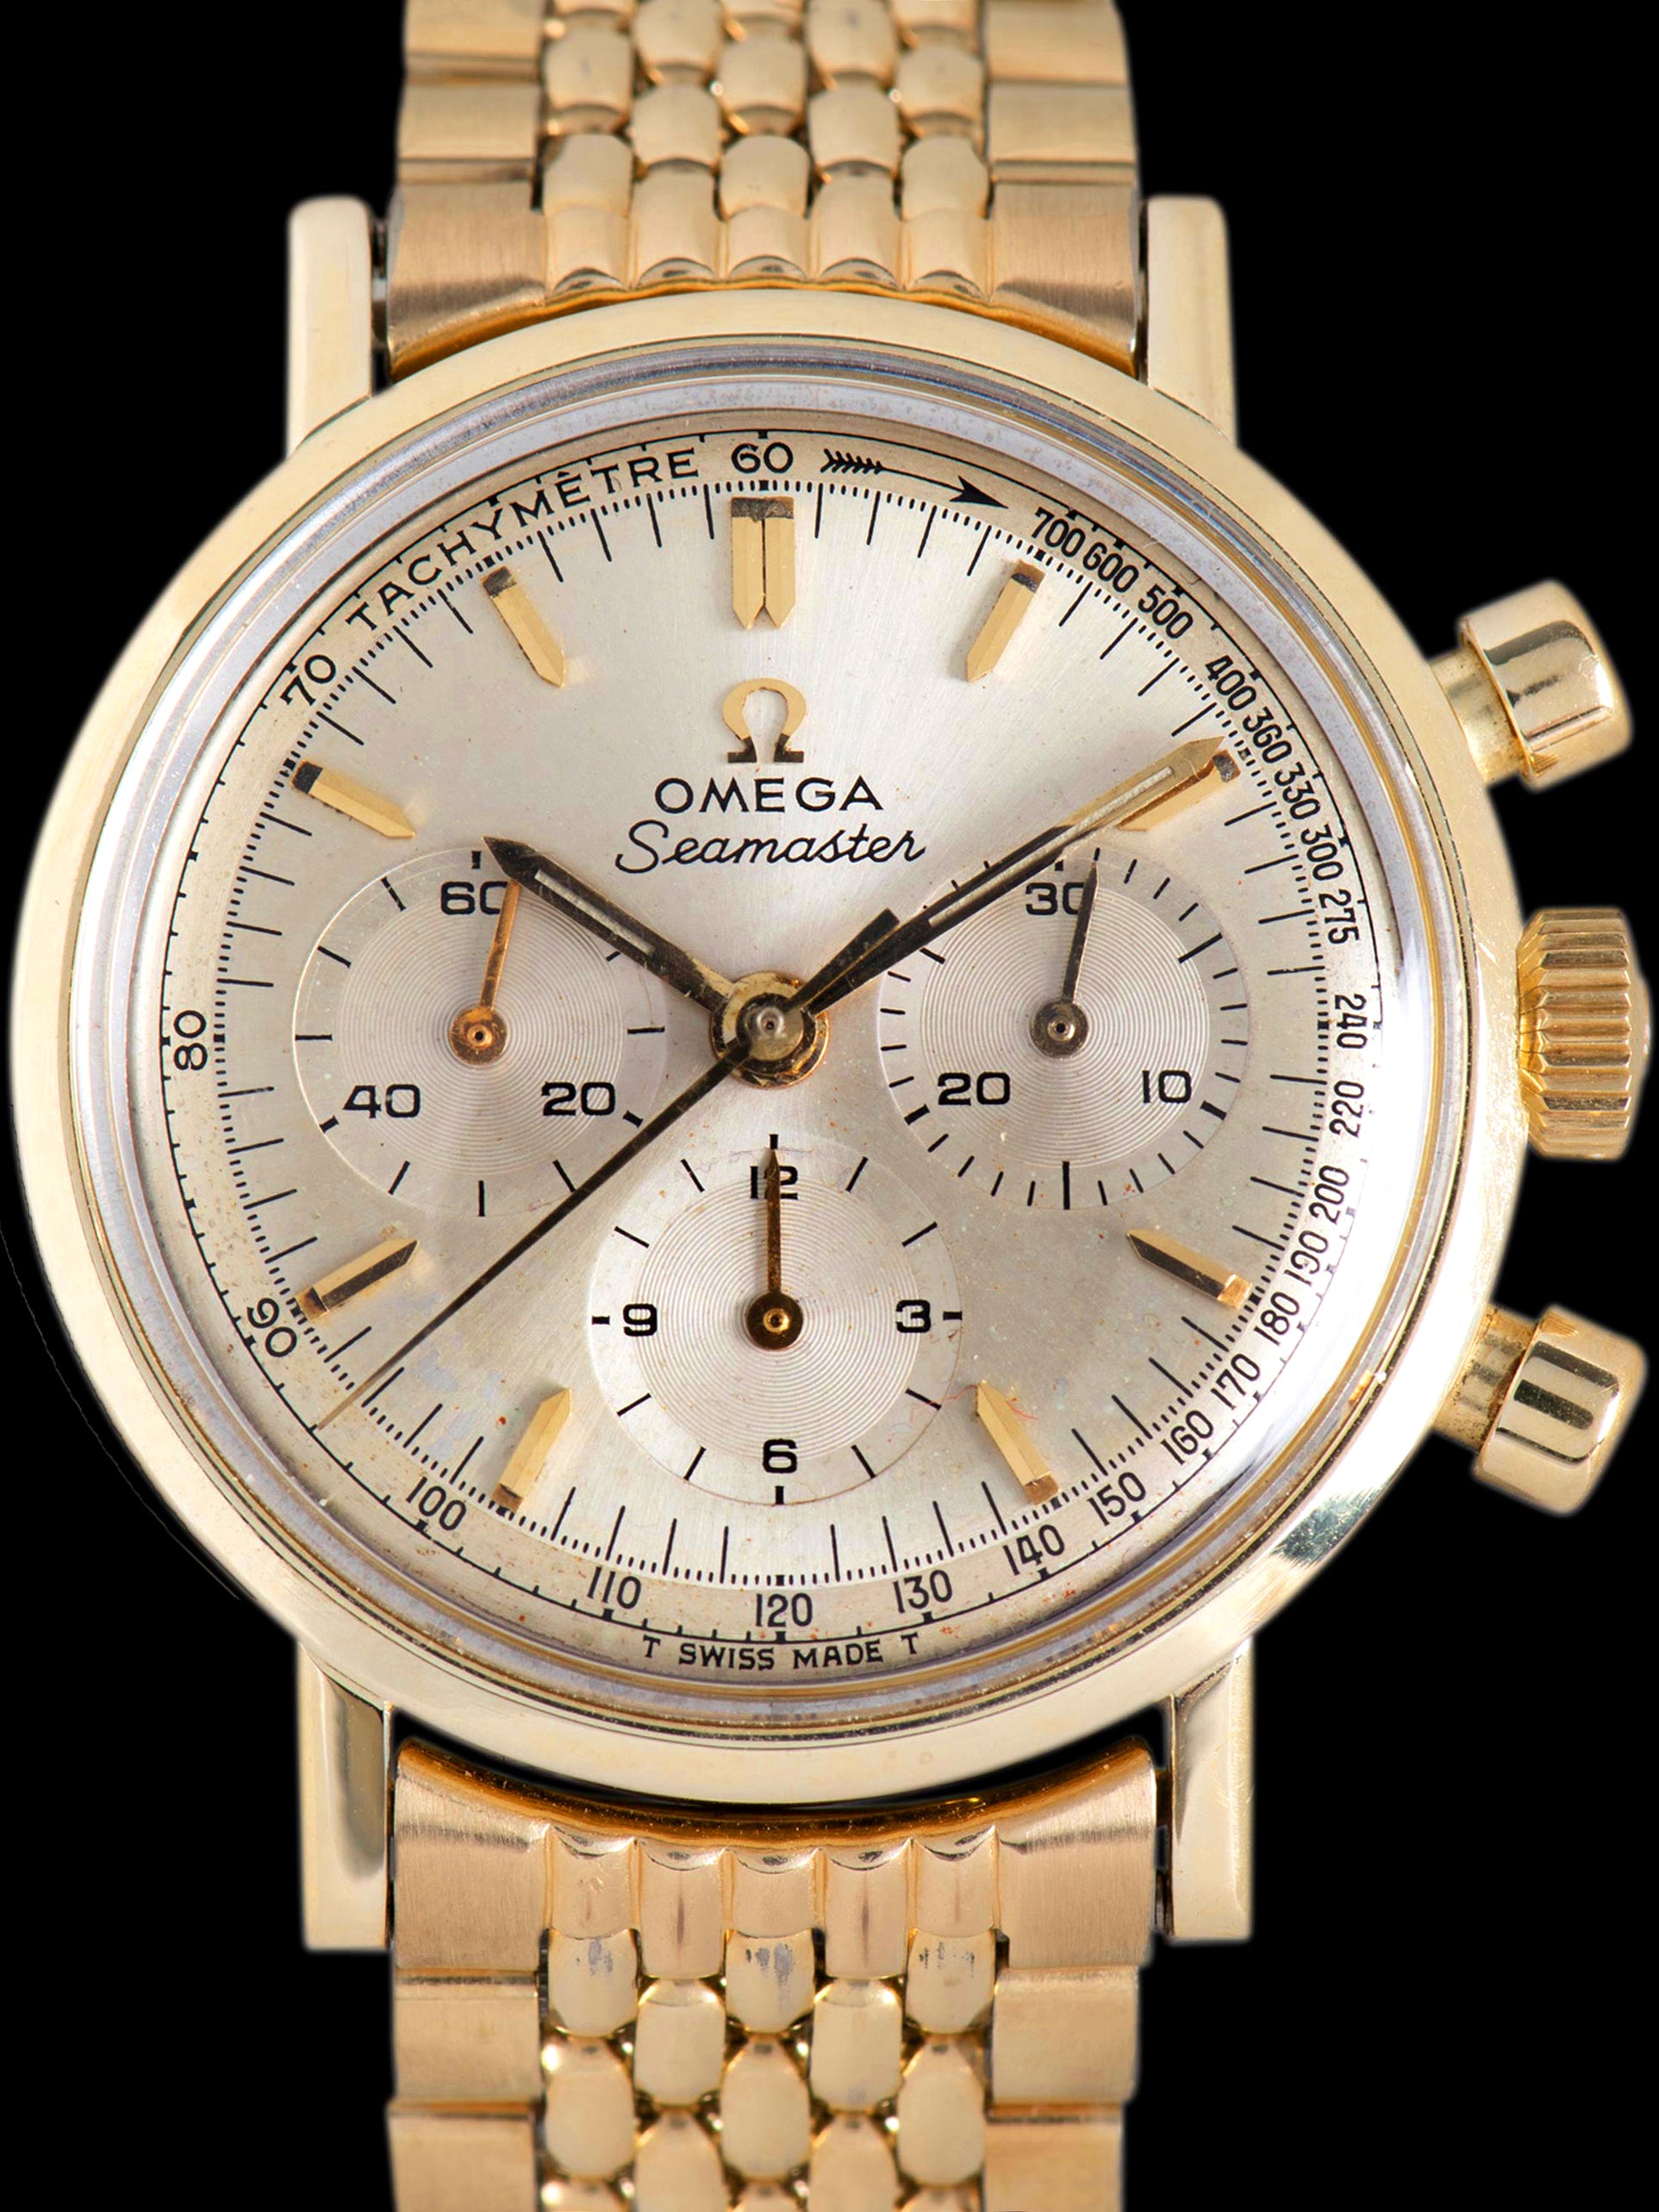 1967 Omega Seamaster Chronograph (Ref. 105.005-65) "Cal. 321" Gold-Filled Case